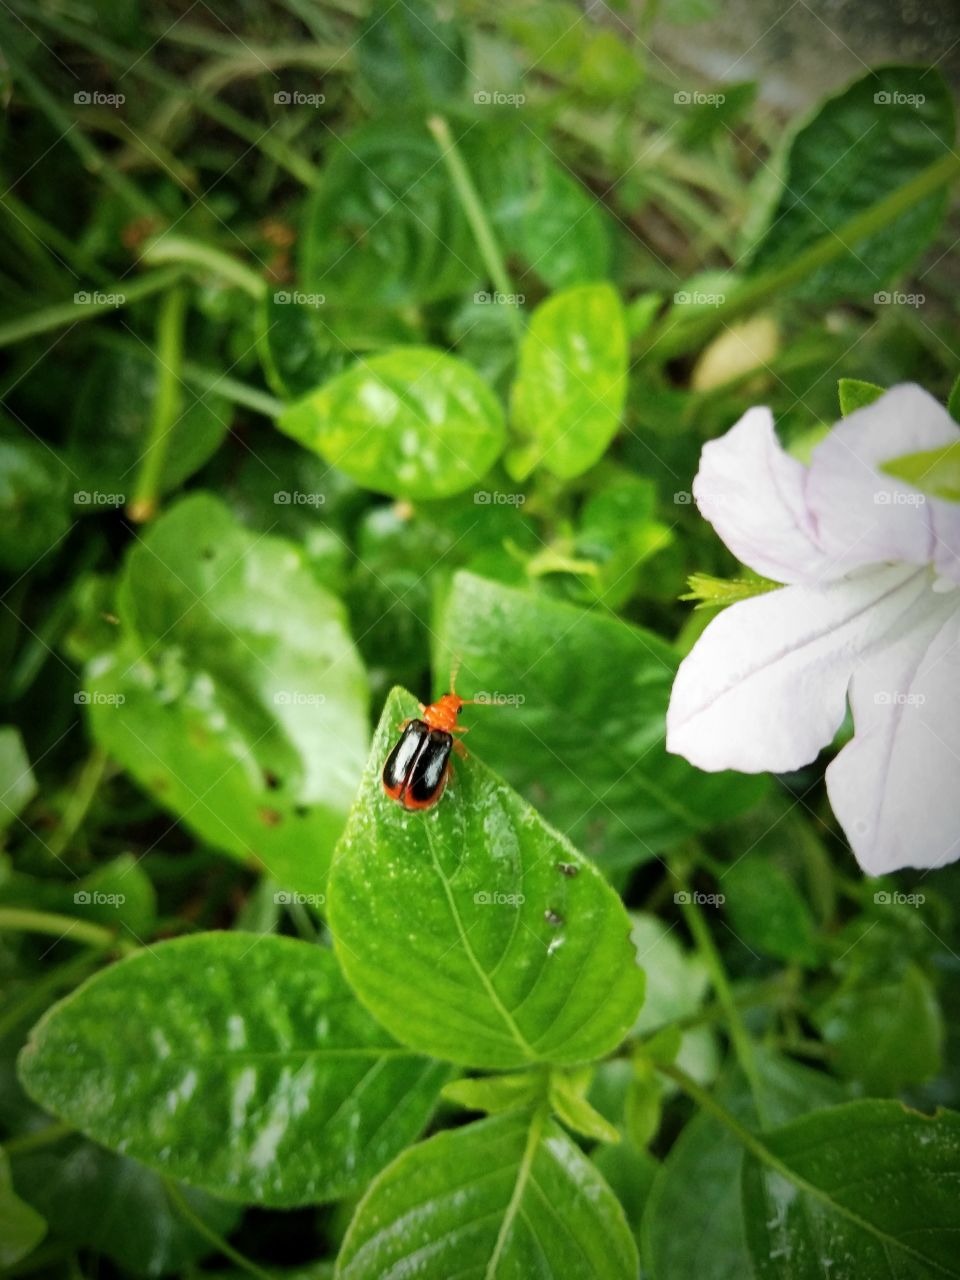 A Very Beautiful Black & Orange Insect, With Green Leaf.